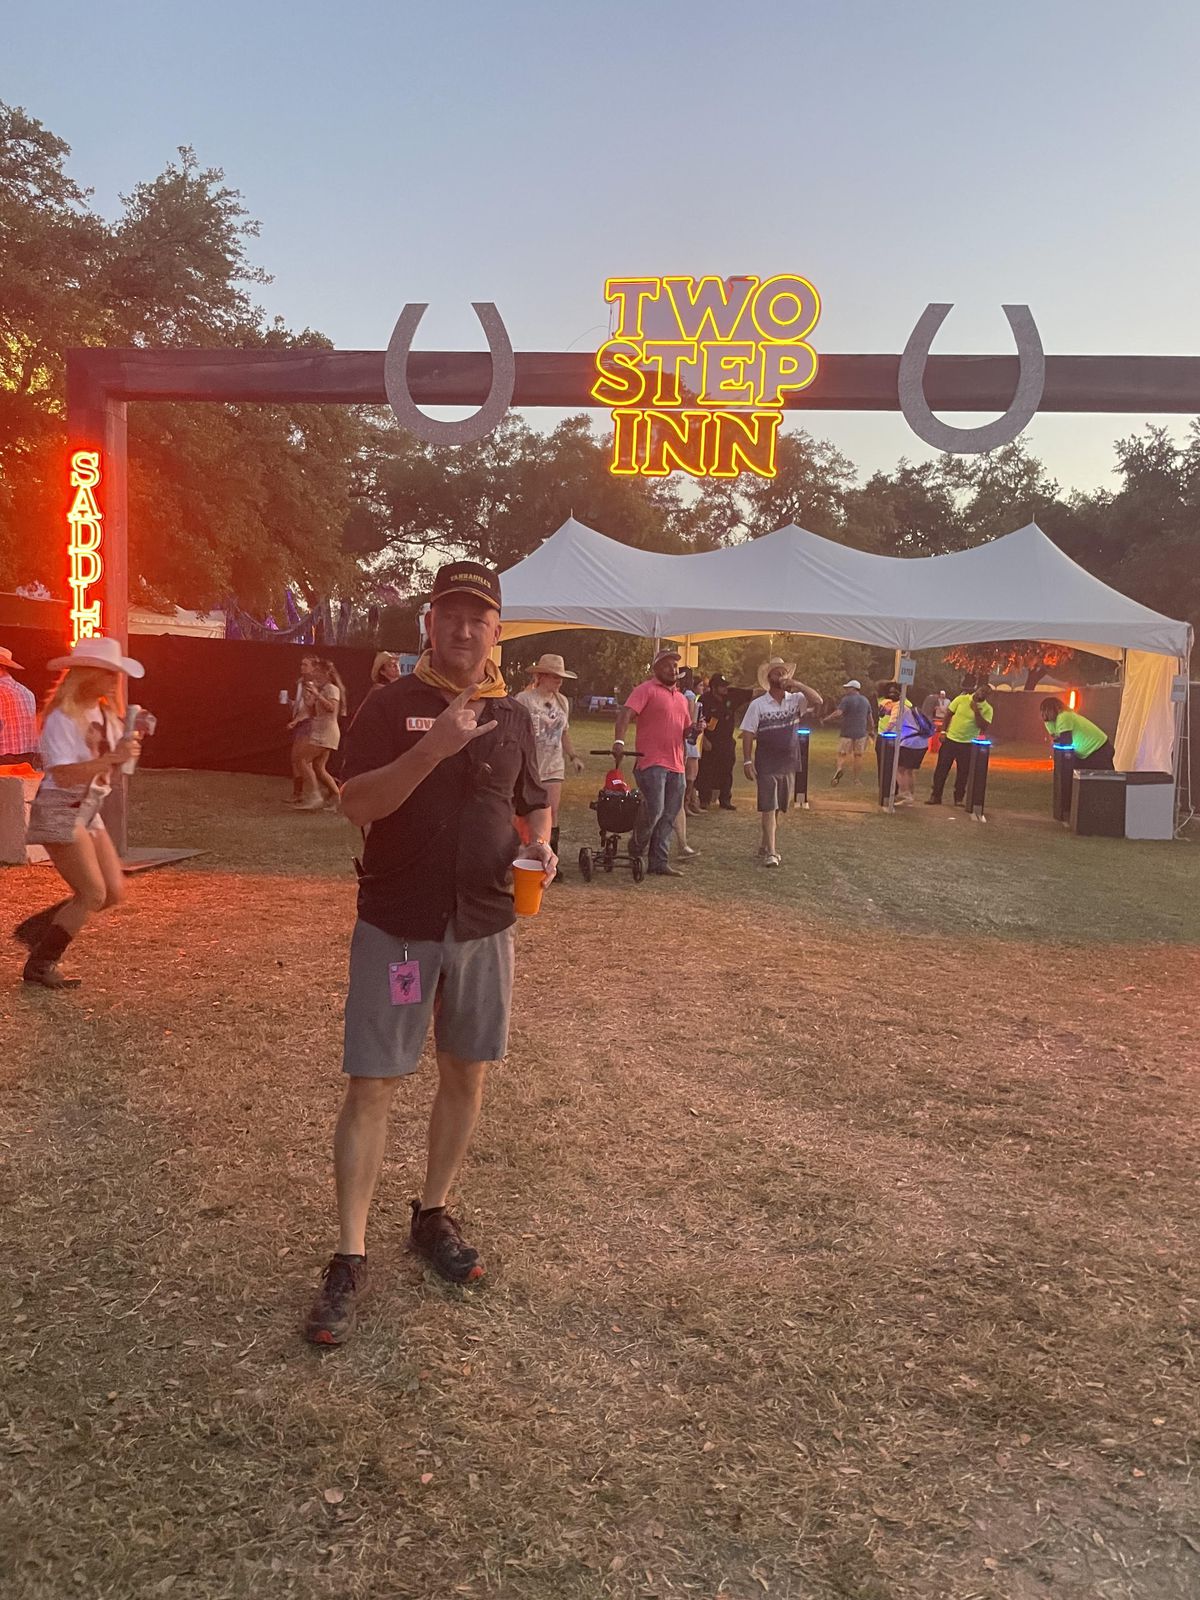 Tim Love stands in front of the entrance to the Two Step Inn music festival, with a neon sign lit up behind him and many people on the festival grounds.